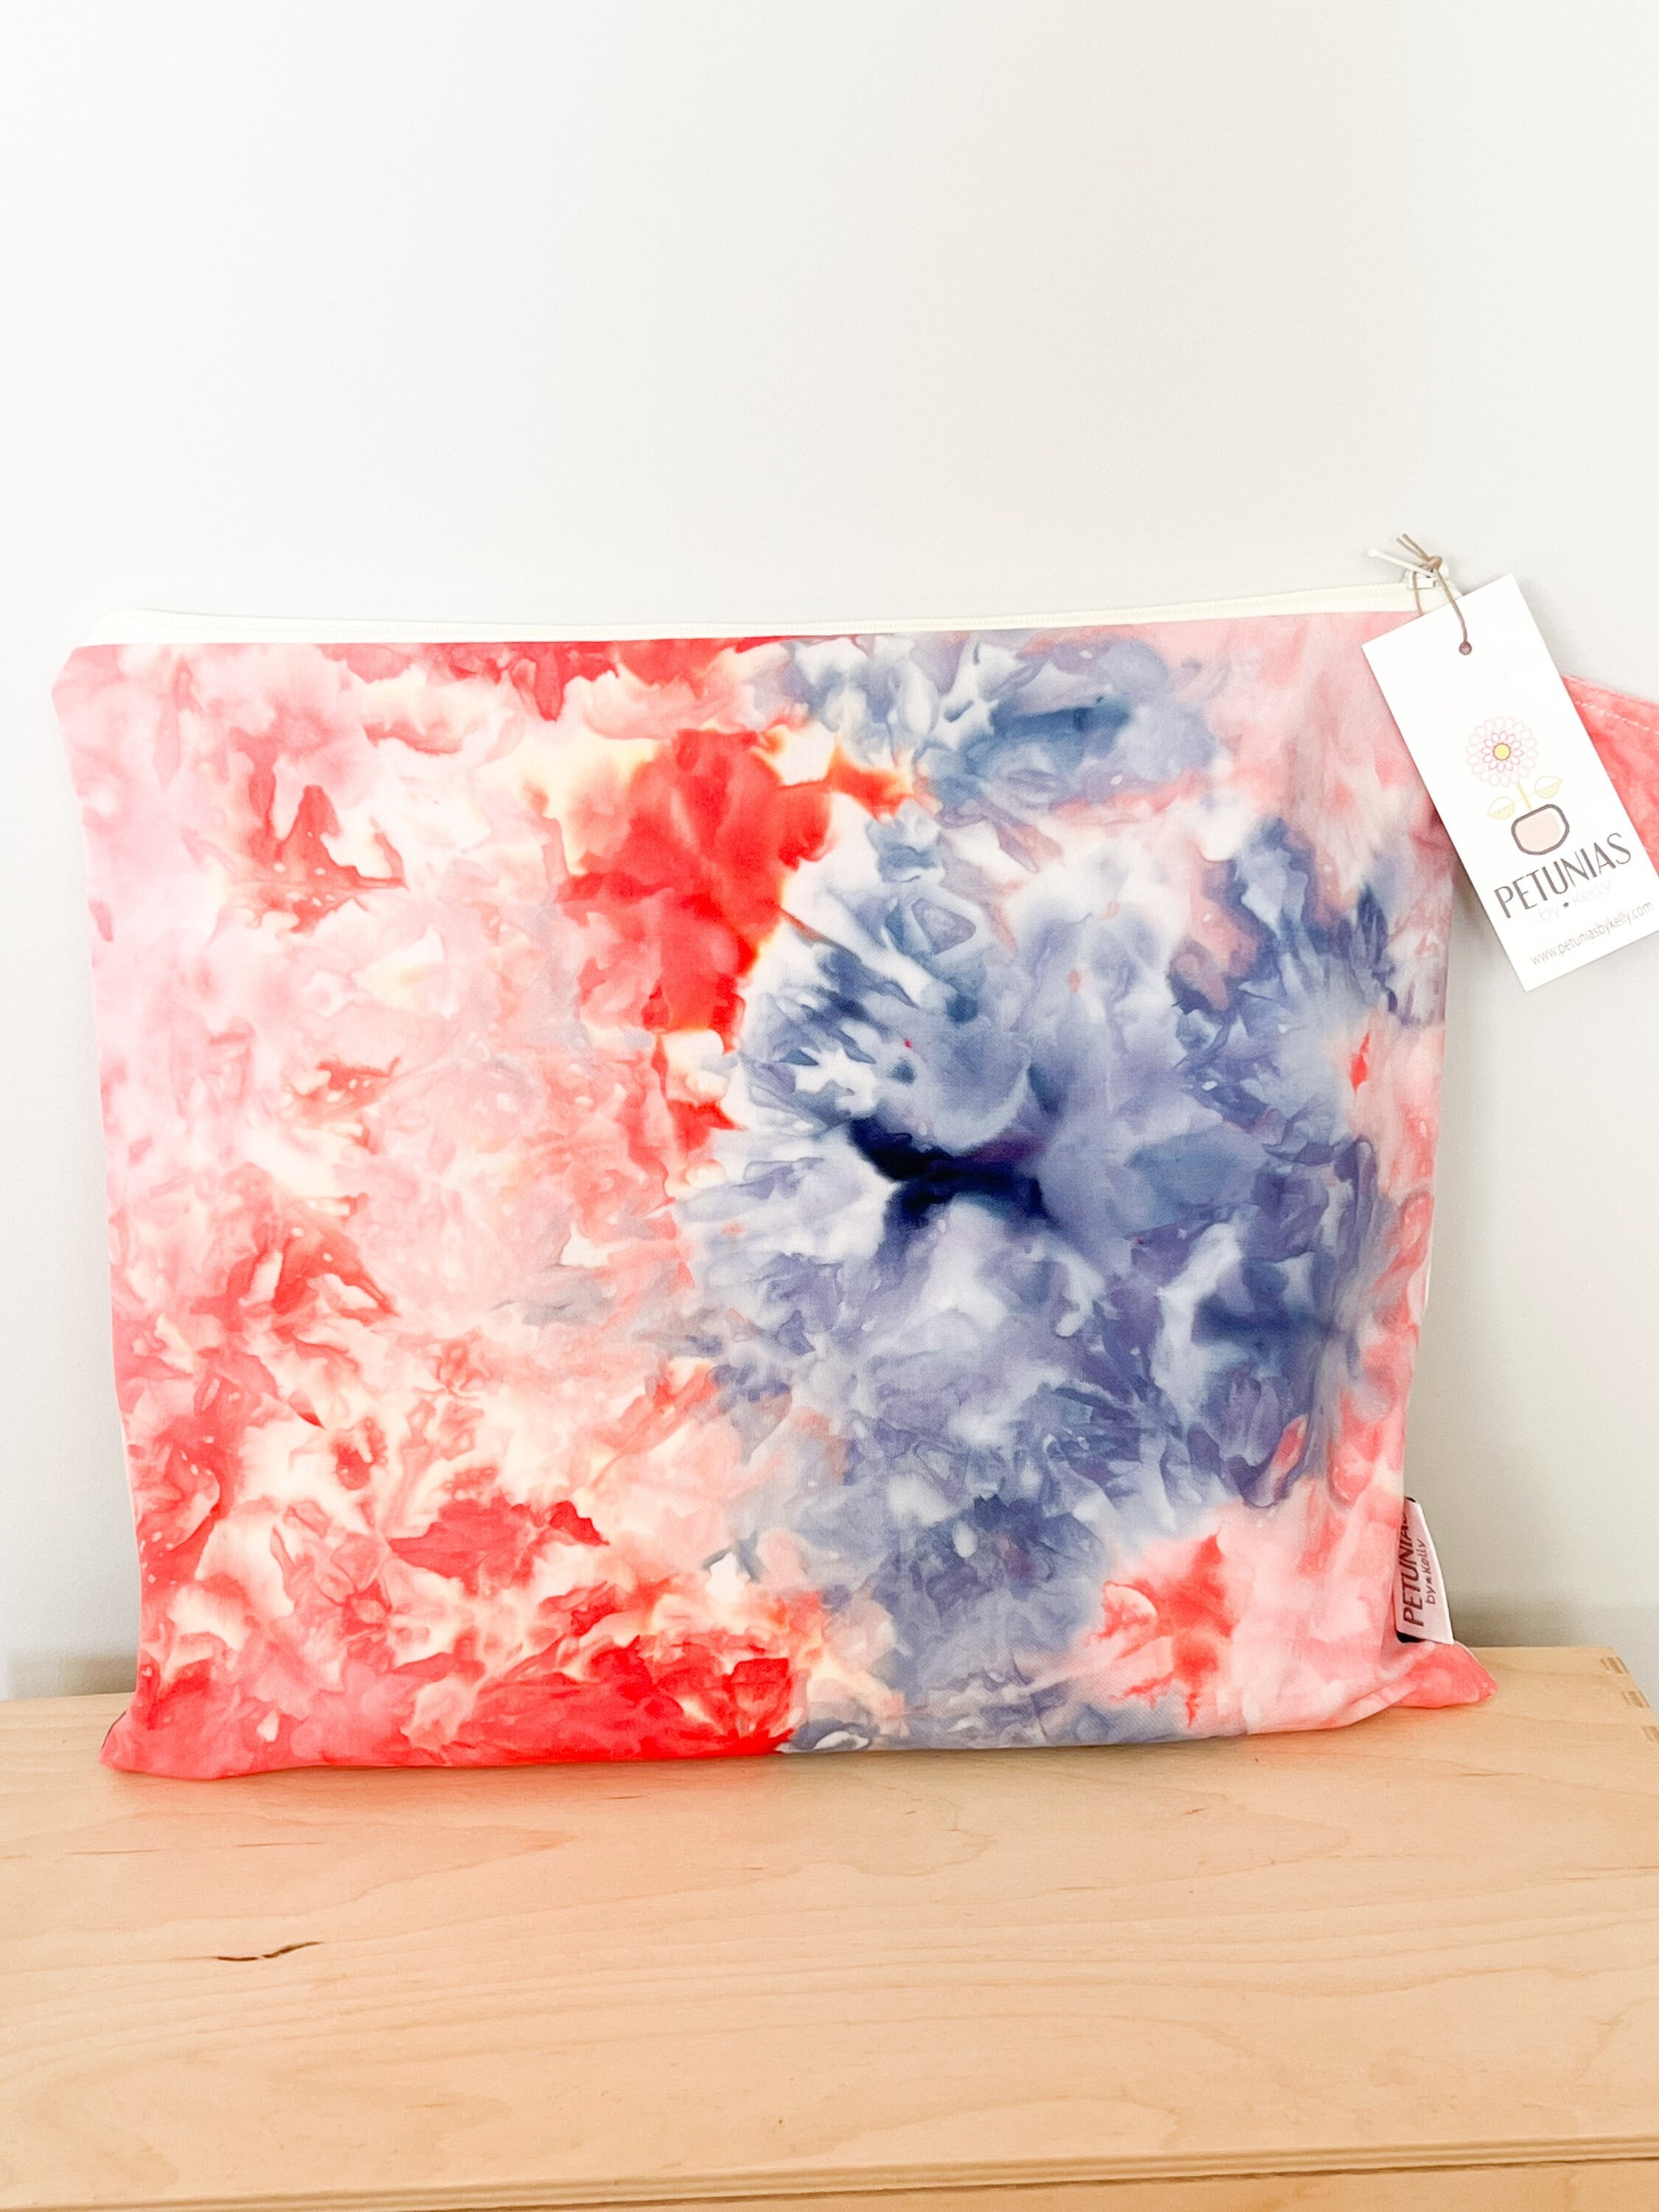 PETUNIAS by Kelly hand dyed Bags & Purses Nappy Bags wetbag The ICKY Bag one of a kind 